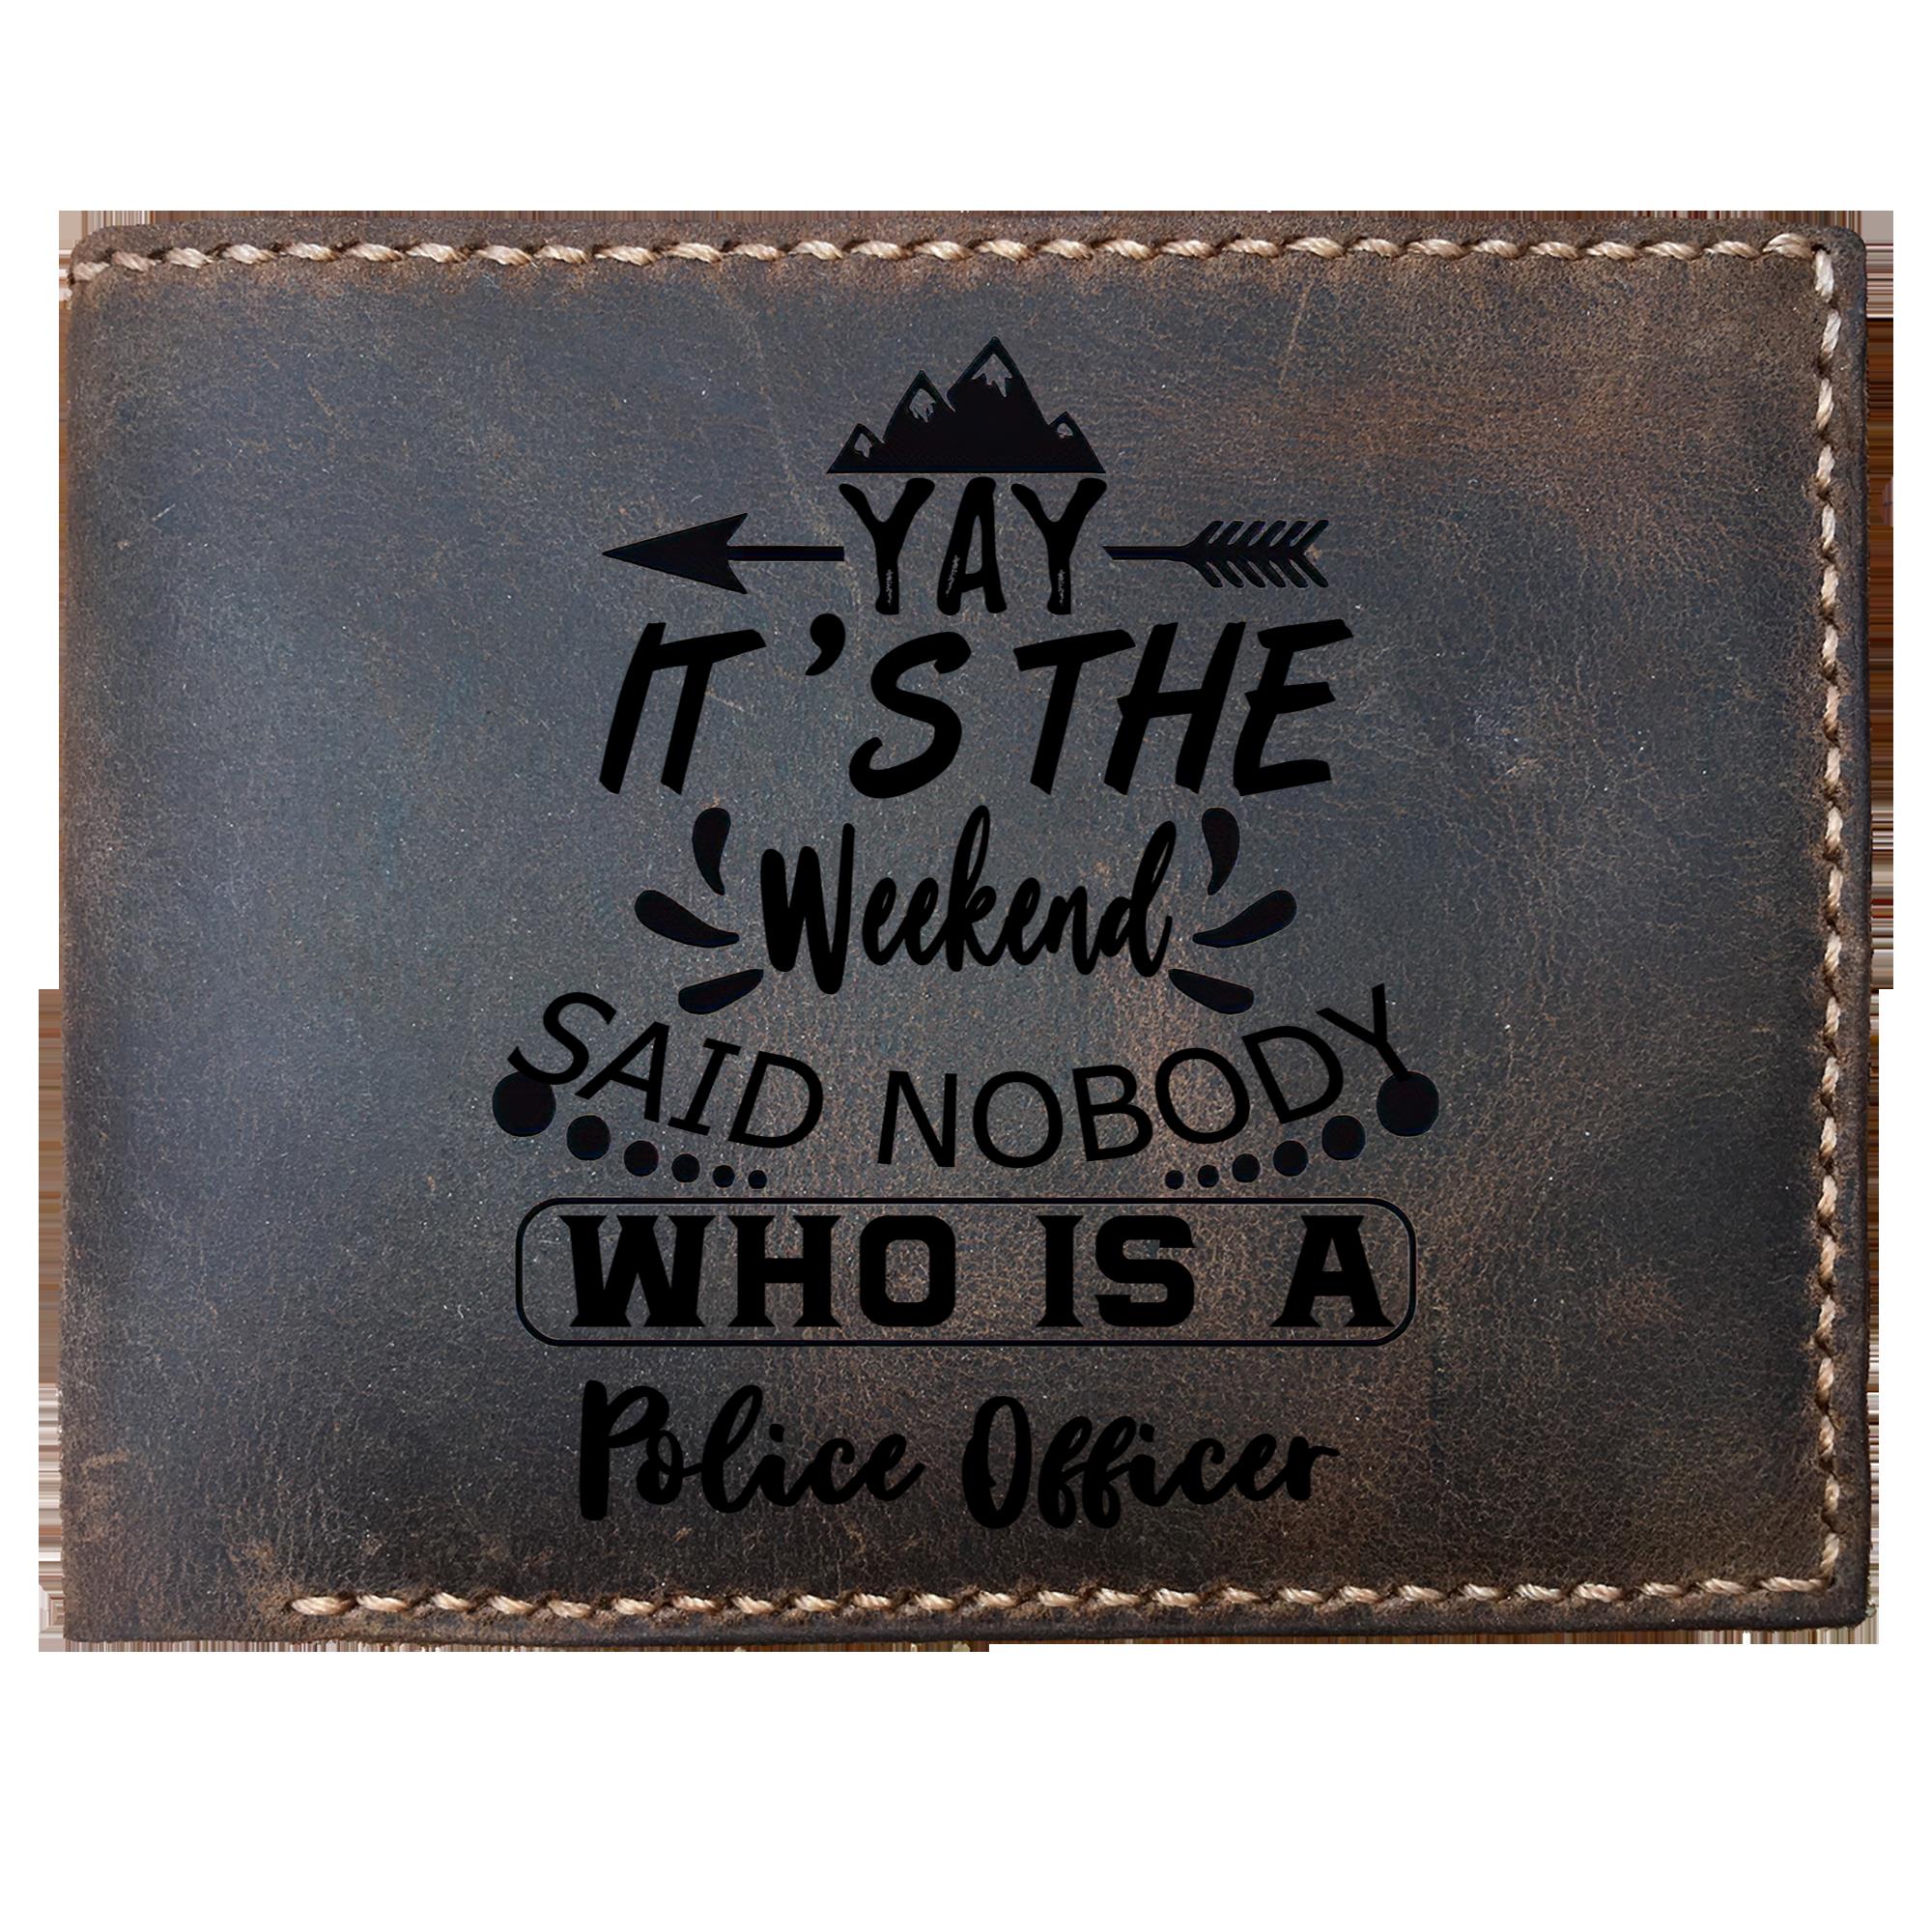 Skitongifts Funny Custom Laser Engraved Bifold Leather Wallet For Men, It's The Weekend Said Nobody Who Is A Police Officer, Father's Day Gifts